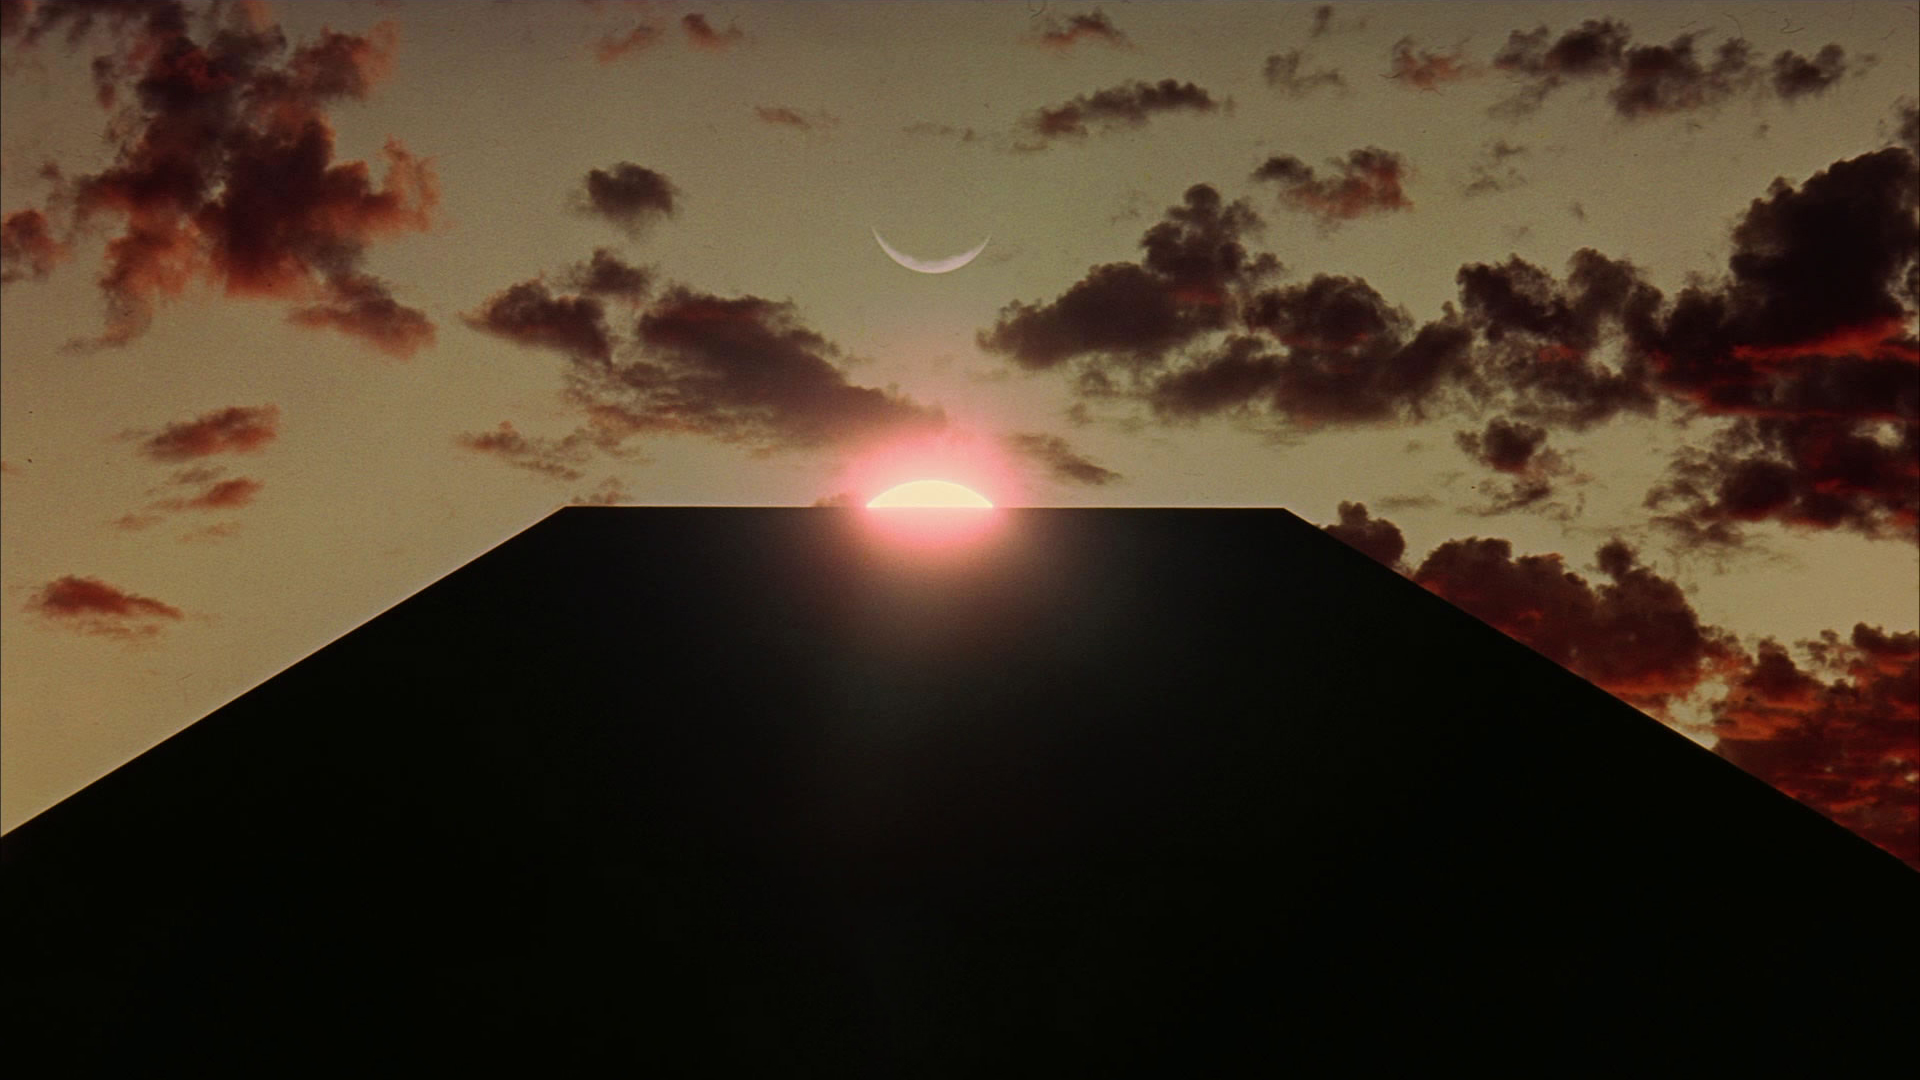 2001: A Space Odyssey - The monolith